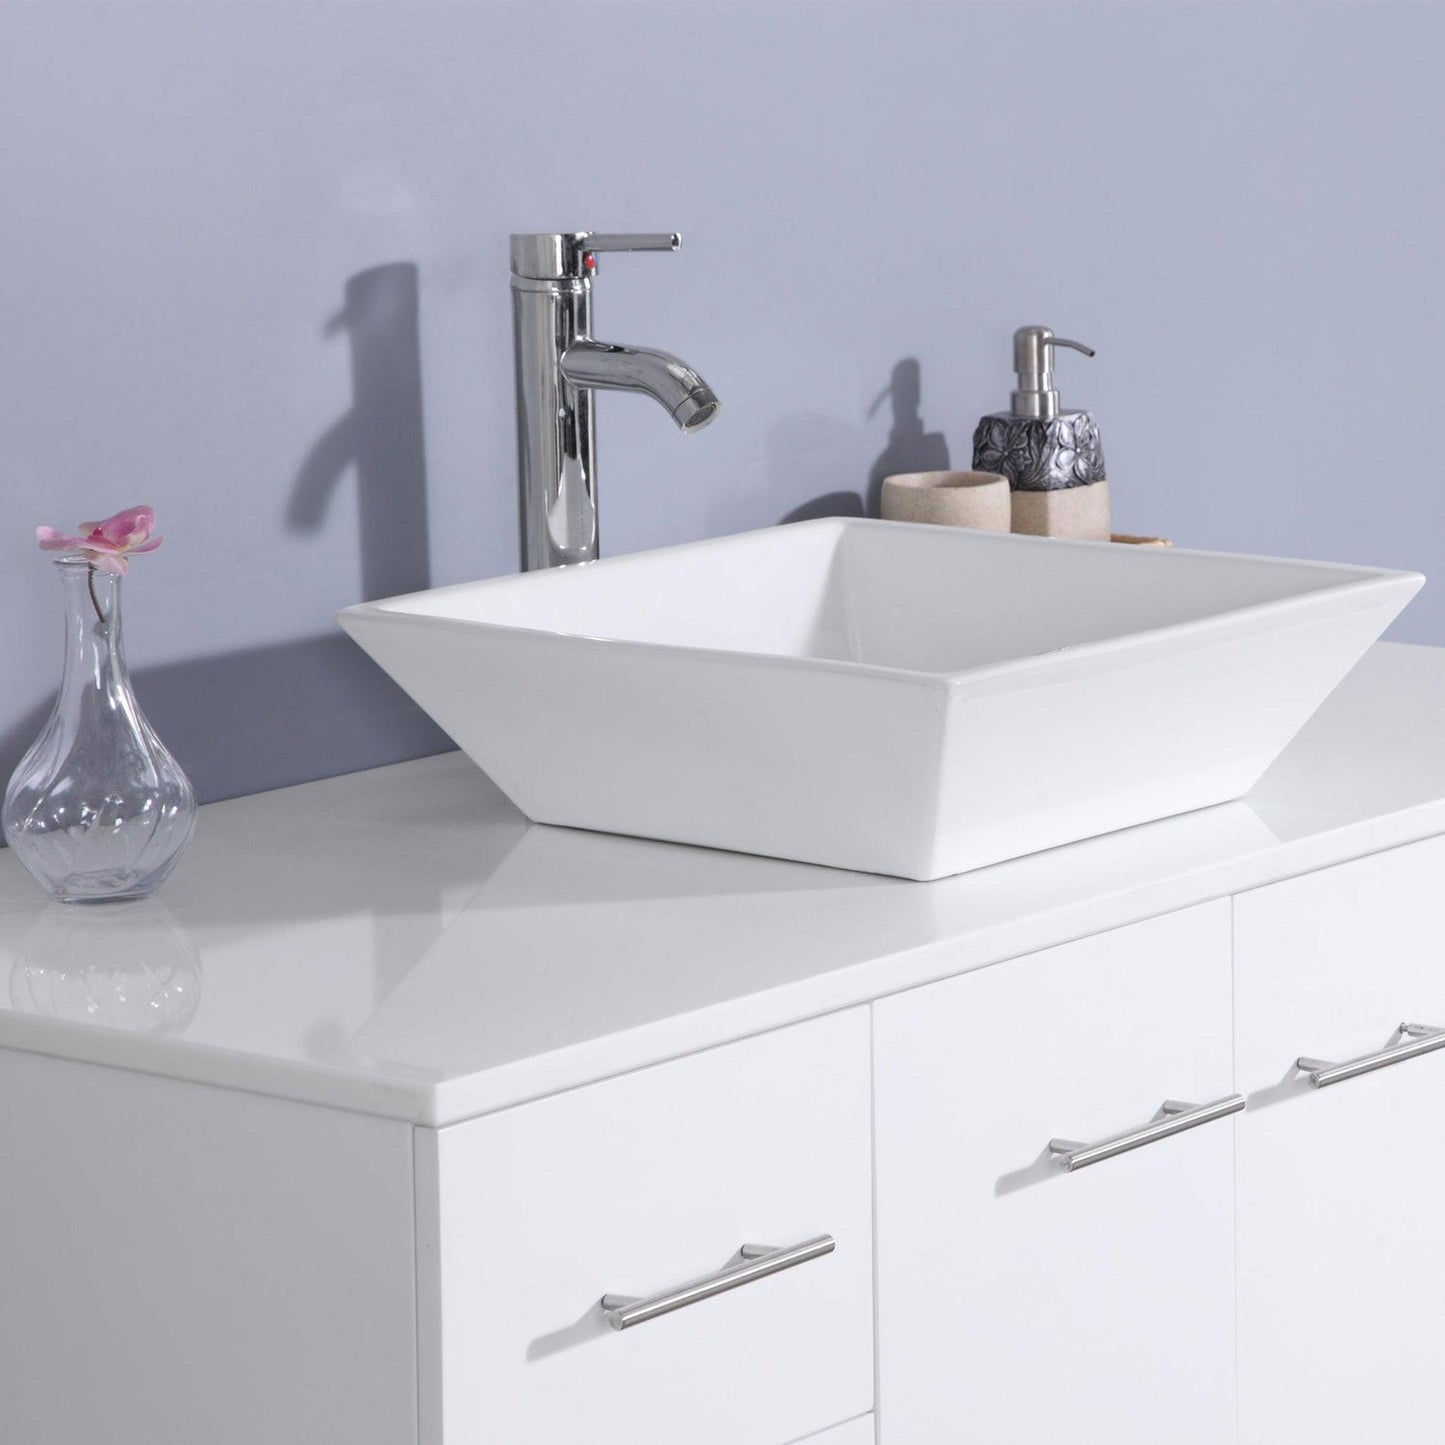 Eviva Totti Wave 48" x 16" White Wall-Mounted Bathroom Vanity With White Man-Made Stone Countertop and Single Porcelain Sink